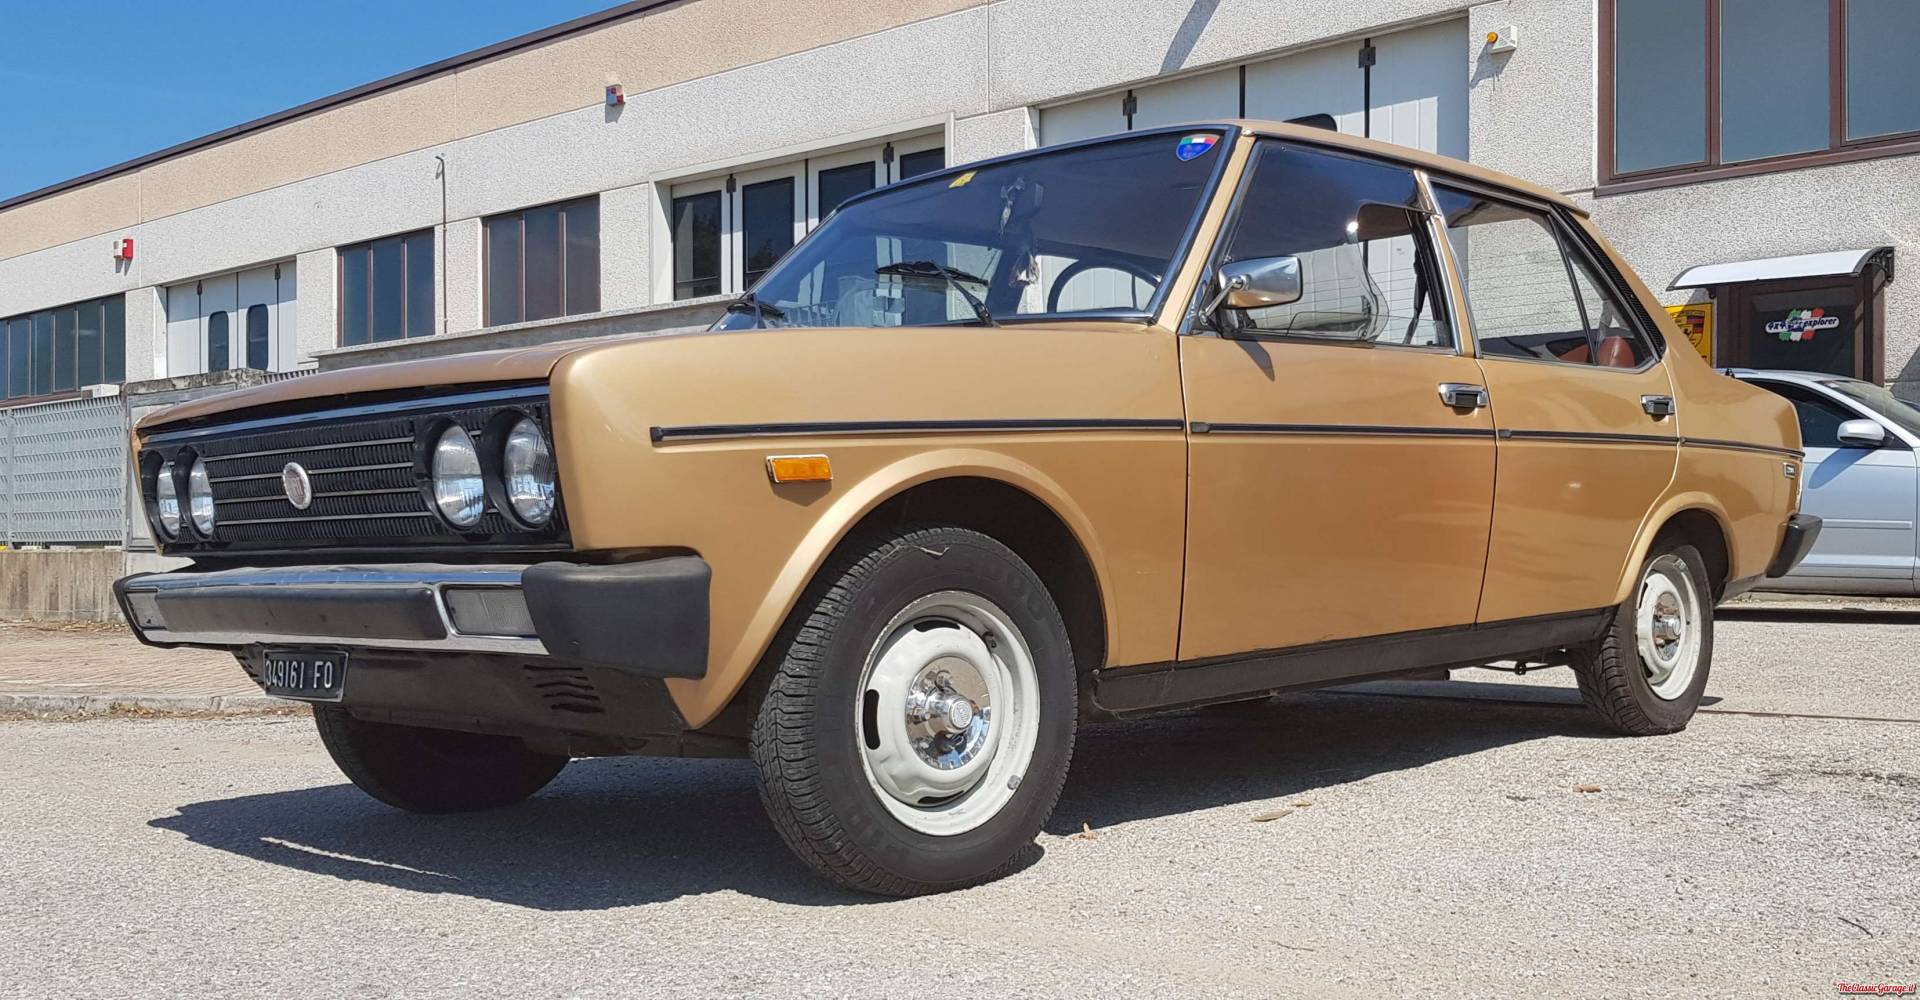 For Sale FIAT 131 S Mirafiori (1976) offered for AUD 8,712